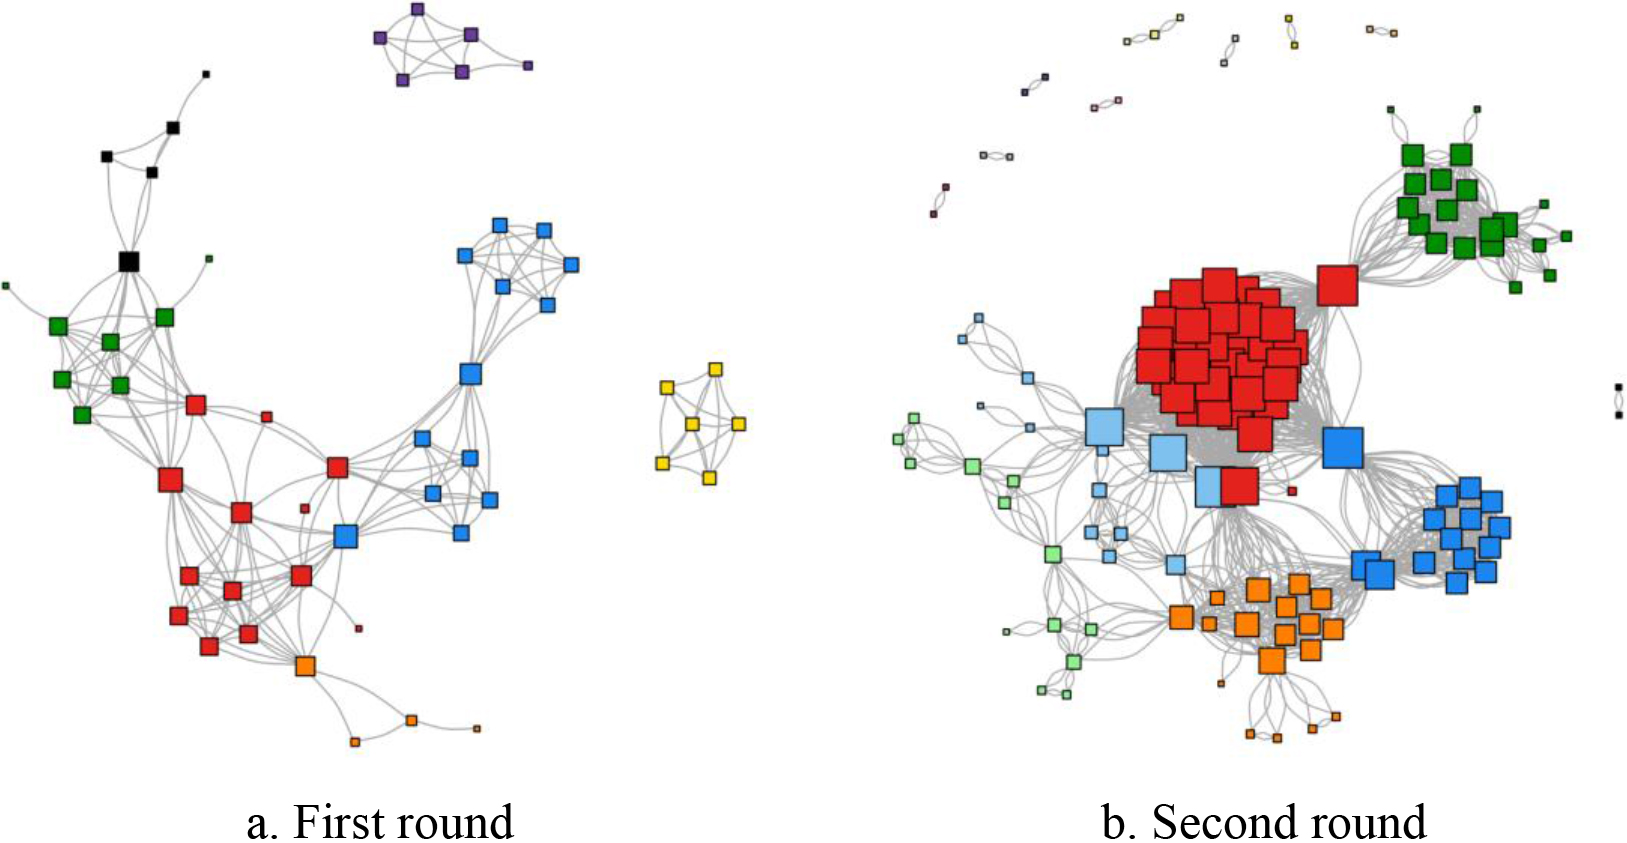 Proposal-proposal networks in the entire category. Note: Squares represent proposals and ties represent comments for the Entire area category. For instance, if Actor A commented on both on Proposals A and B, we drew a tie between the proposals, showing an inter-linkedness. Different colors were assigned based on the Louvain community detection algorithm.